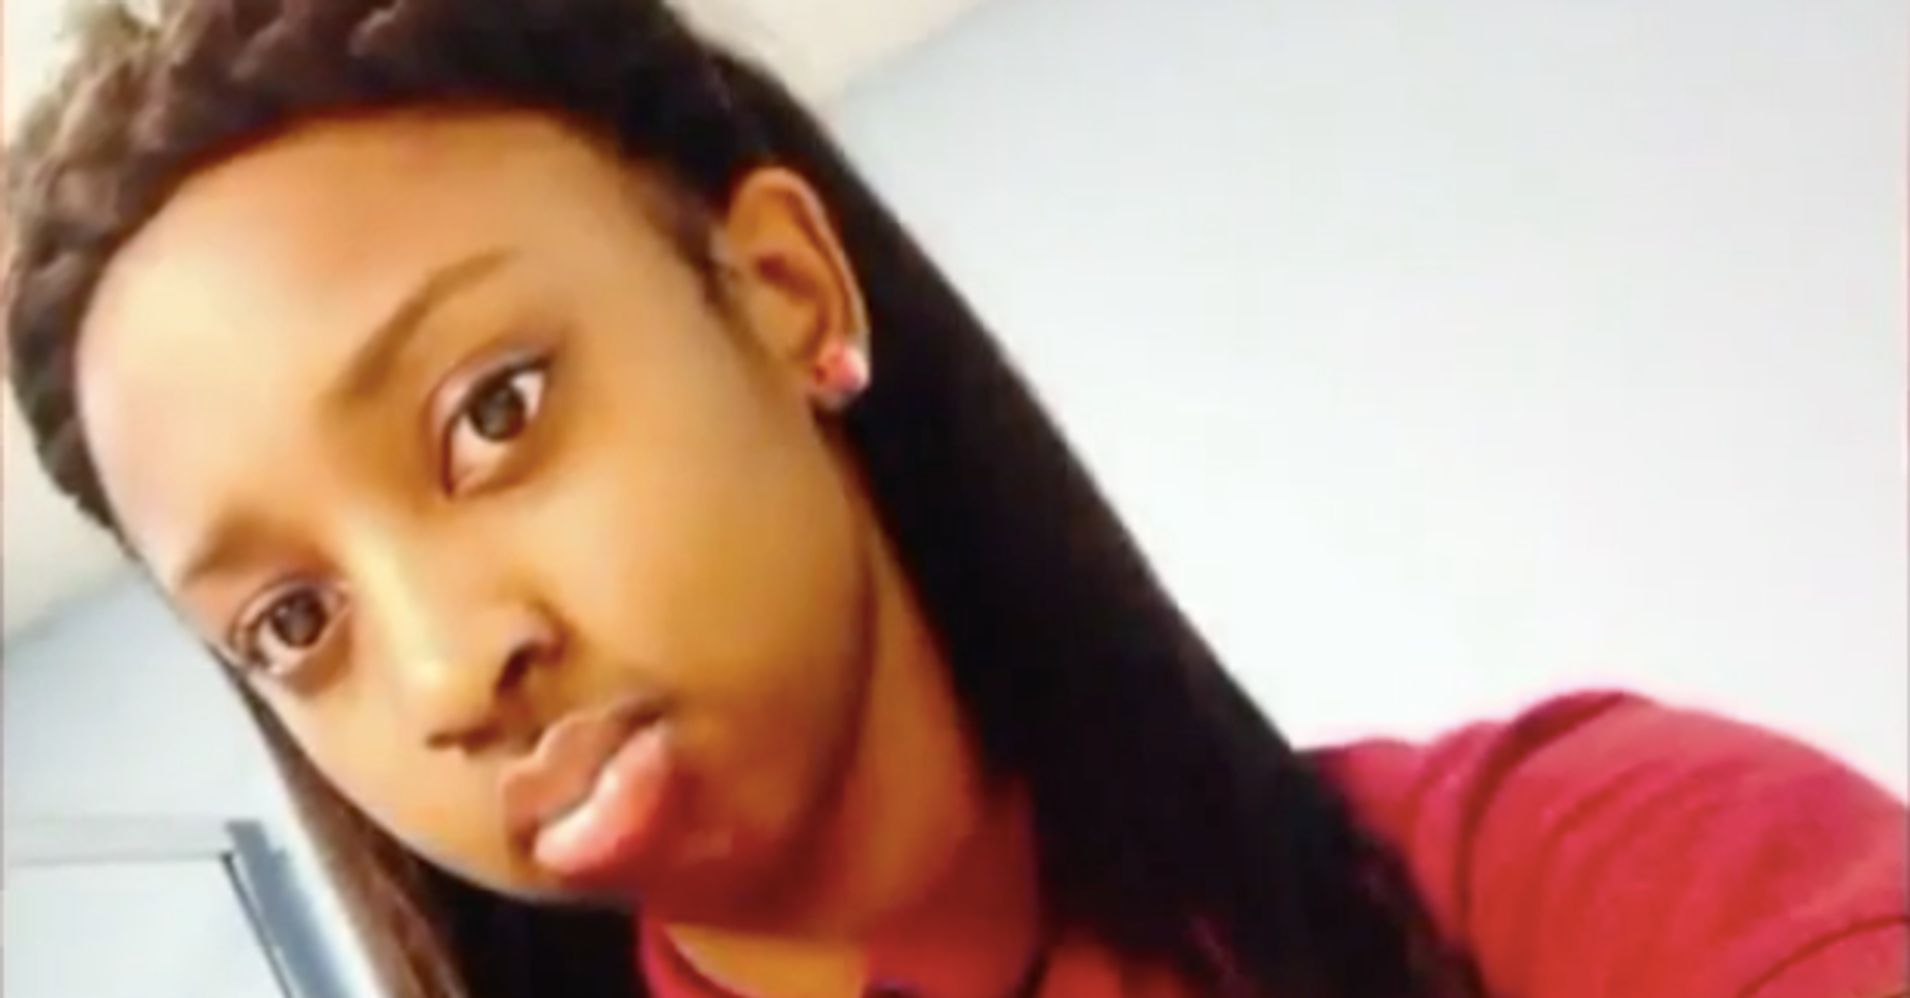 Chicago Teen Found Dead In Hotel Freezer Sparks Outrage Confusion Huffpost